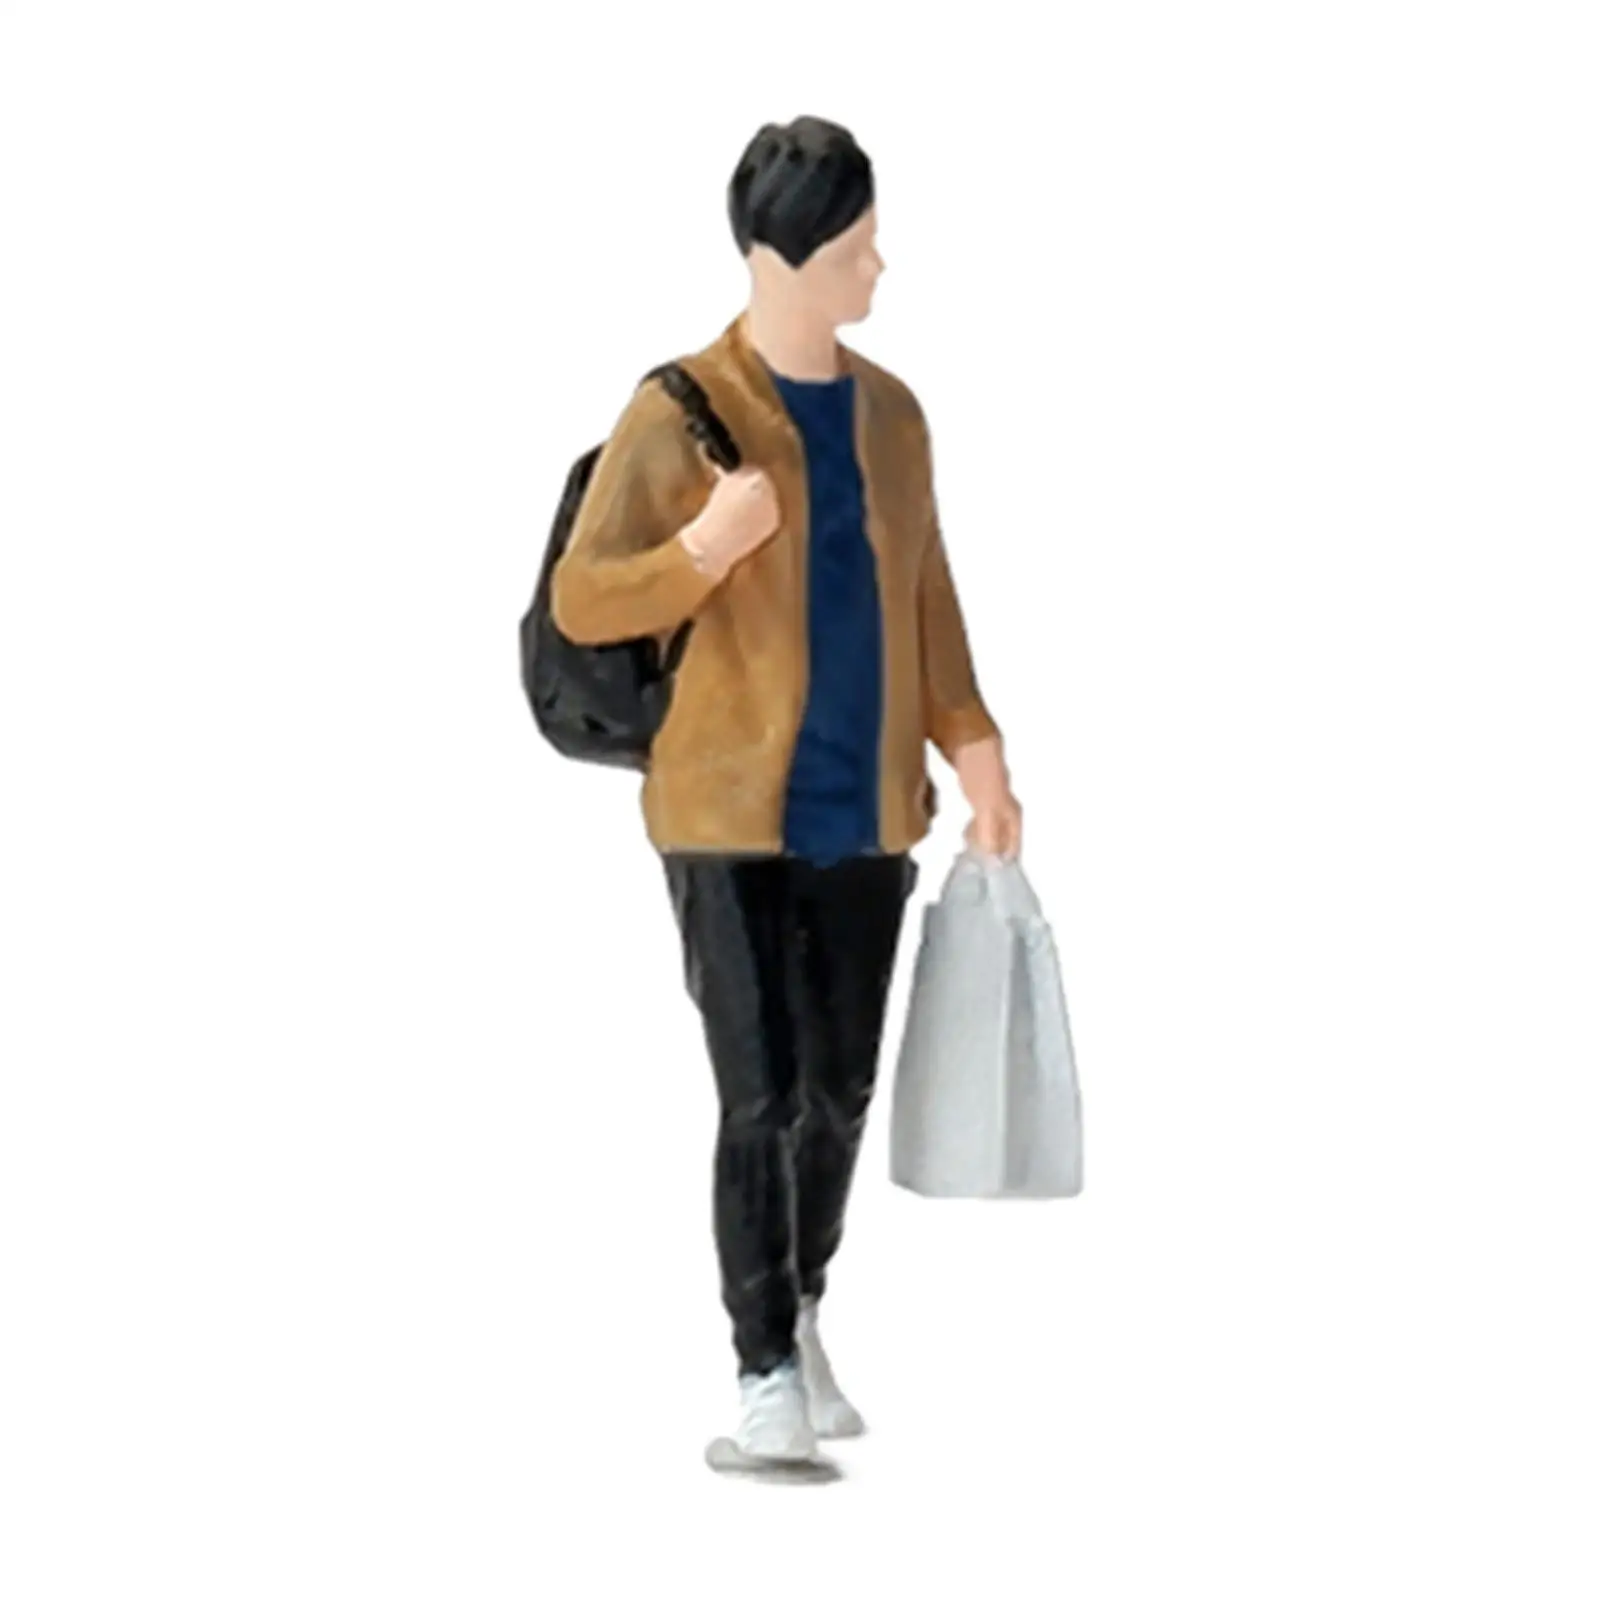 Mini Diorama Street Character Figure Collectibles with Backpack and Lunch Bags Model Trains People Figures for Scenery Landscape